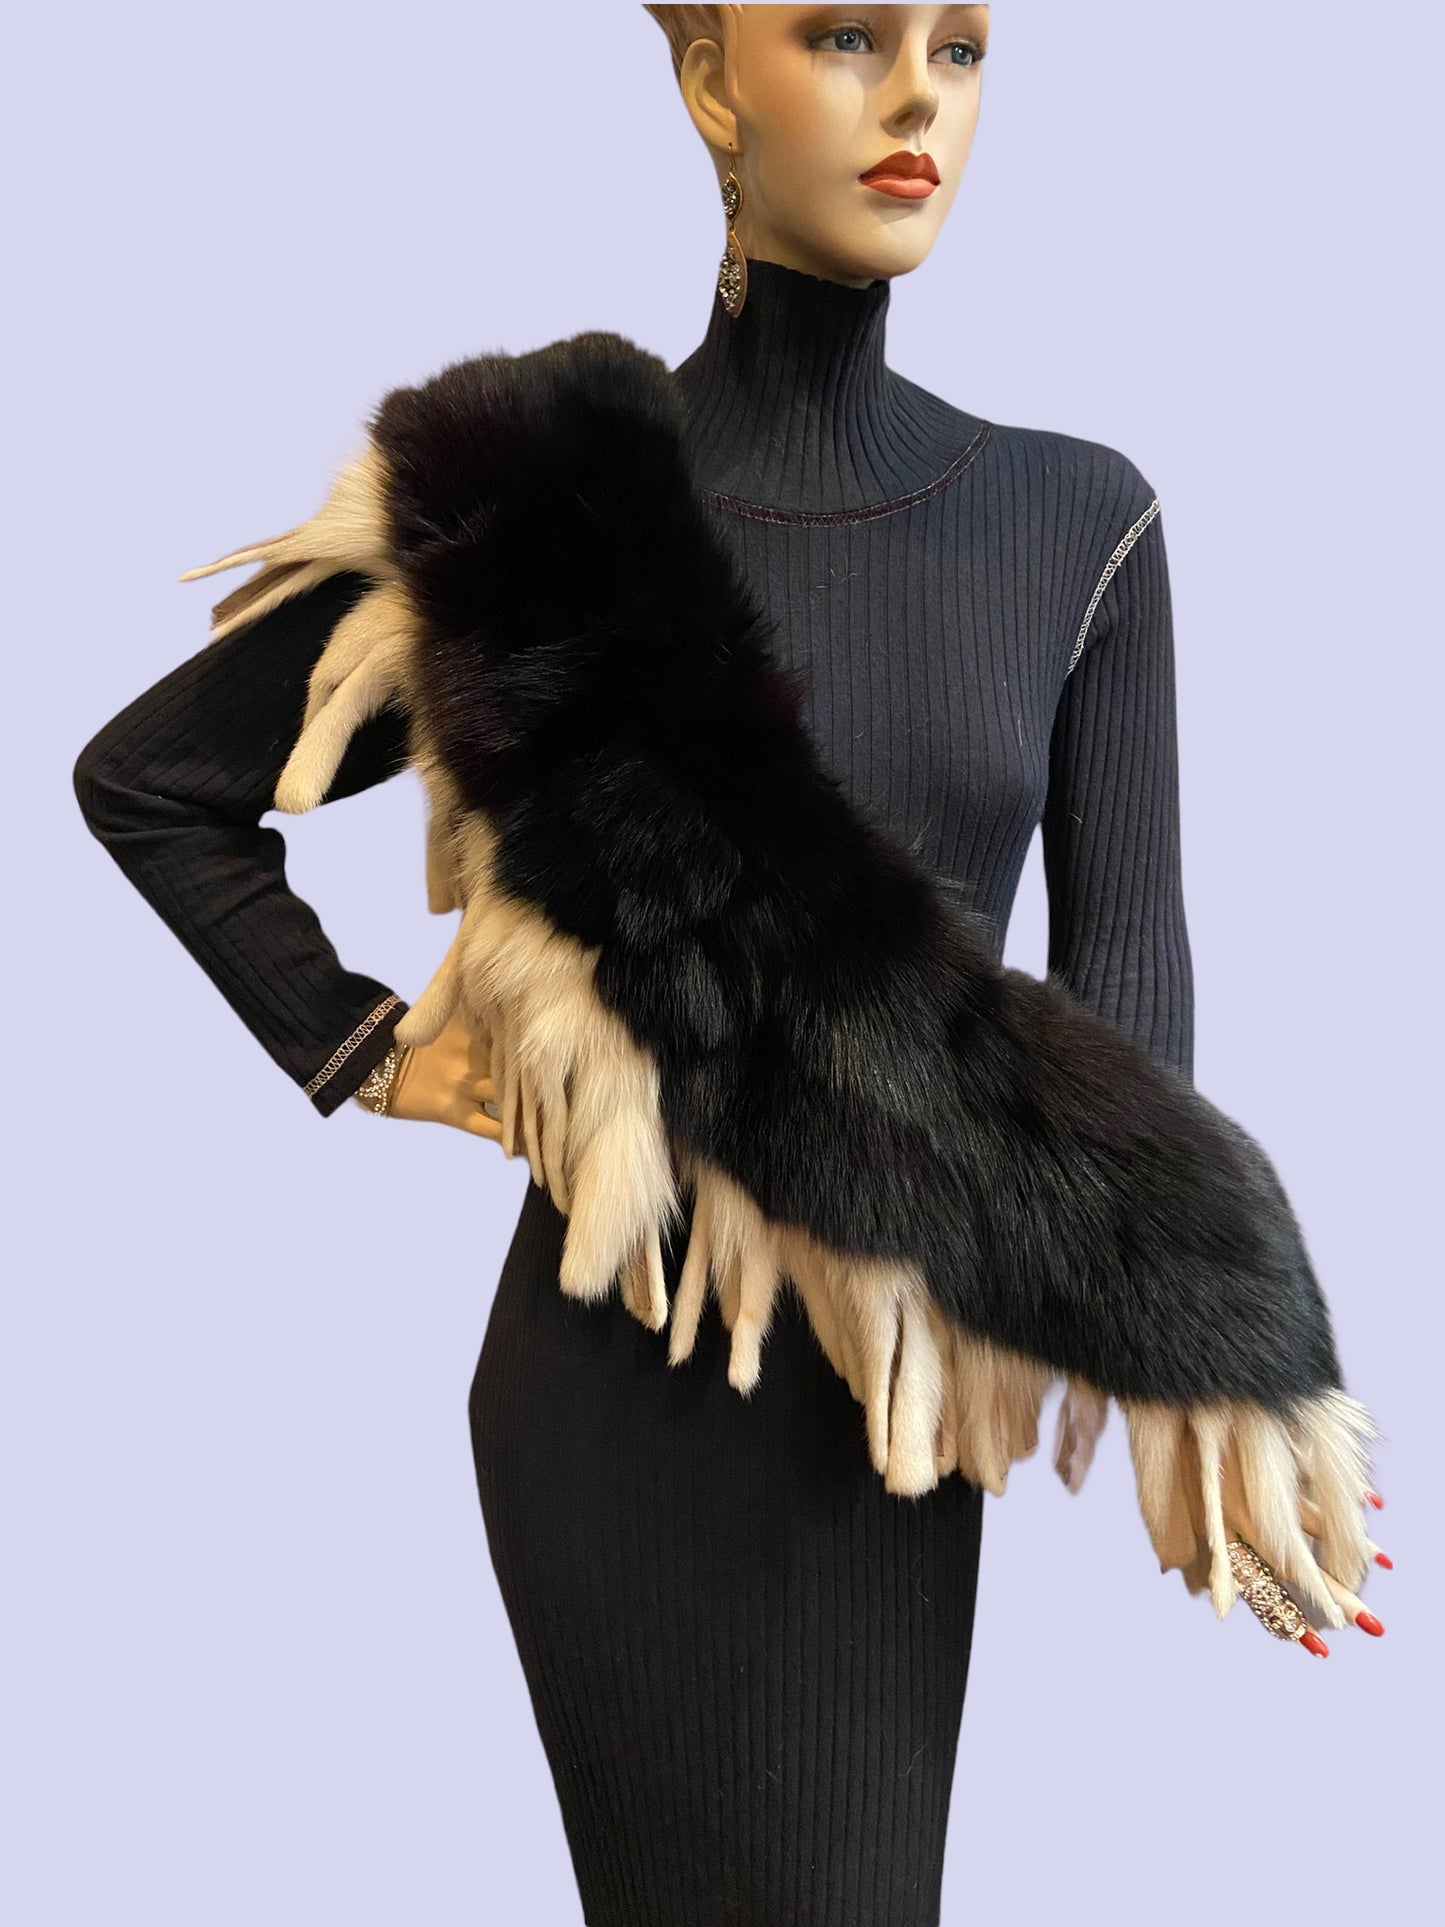 Fox Fur Collar - Black and White With Tassels